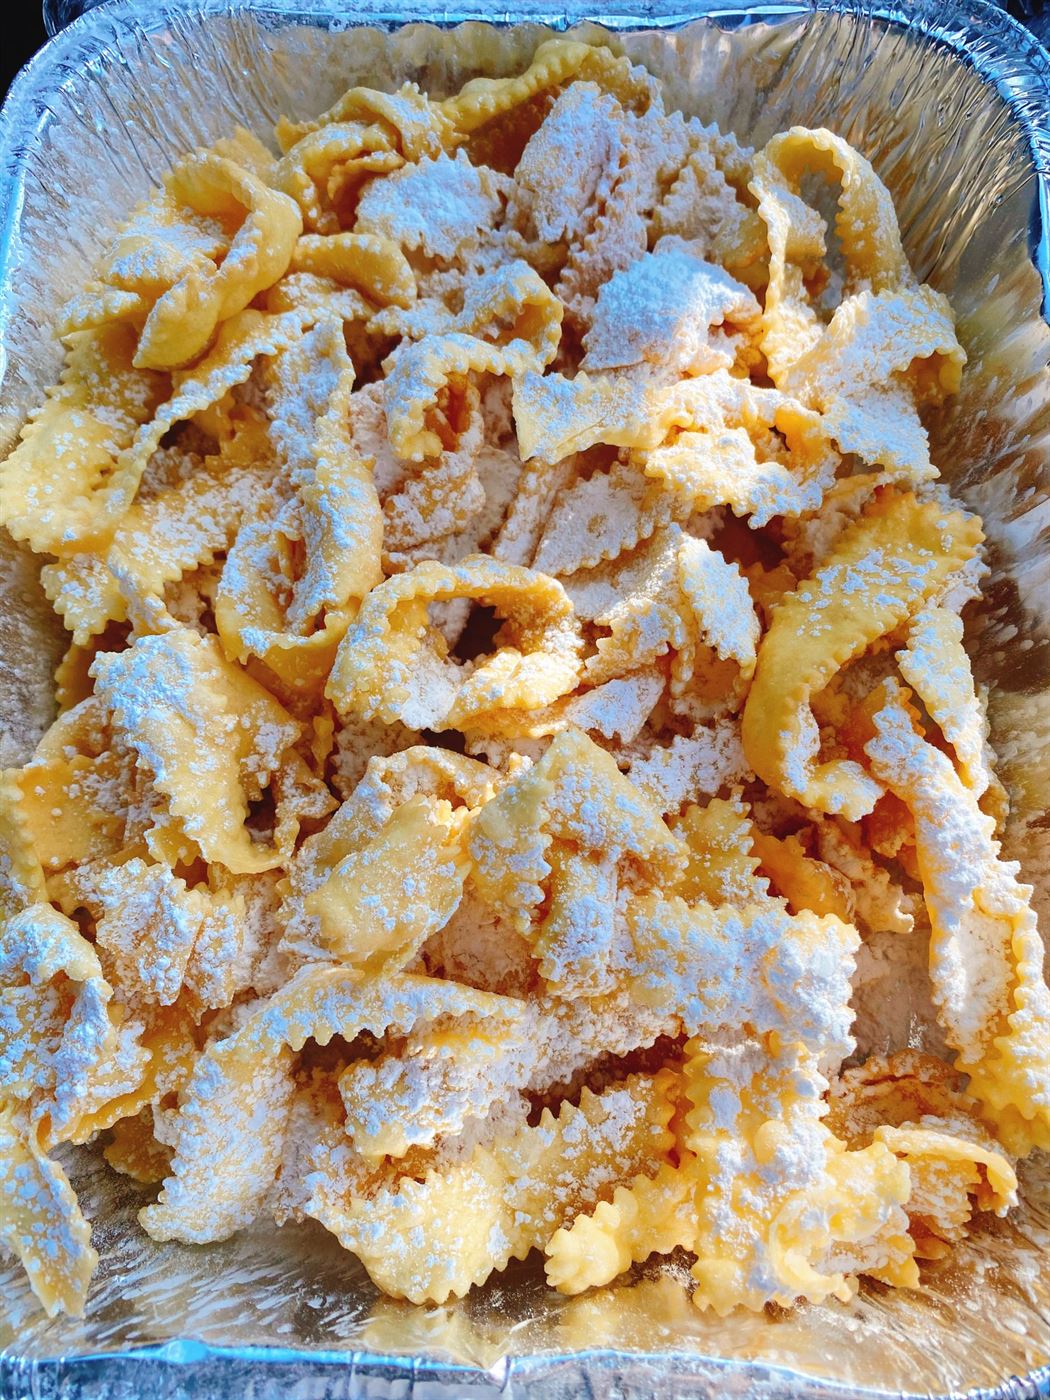 Lozi, a Croatian delicacy which are little cookie ribbons sprinkled with powdered sugar and honey. Photo courtesy of Alyssa Bussanich